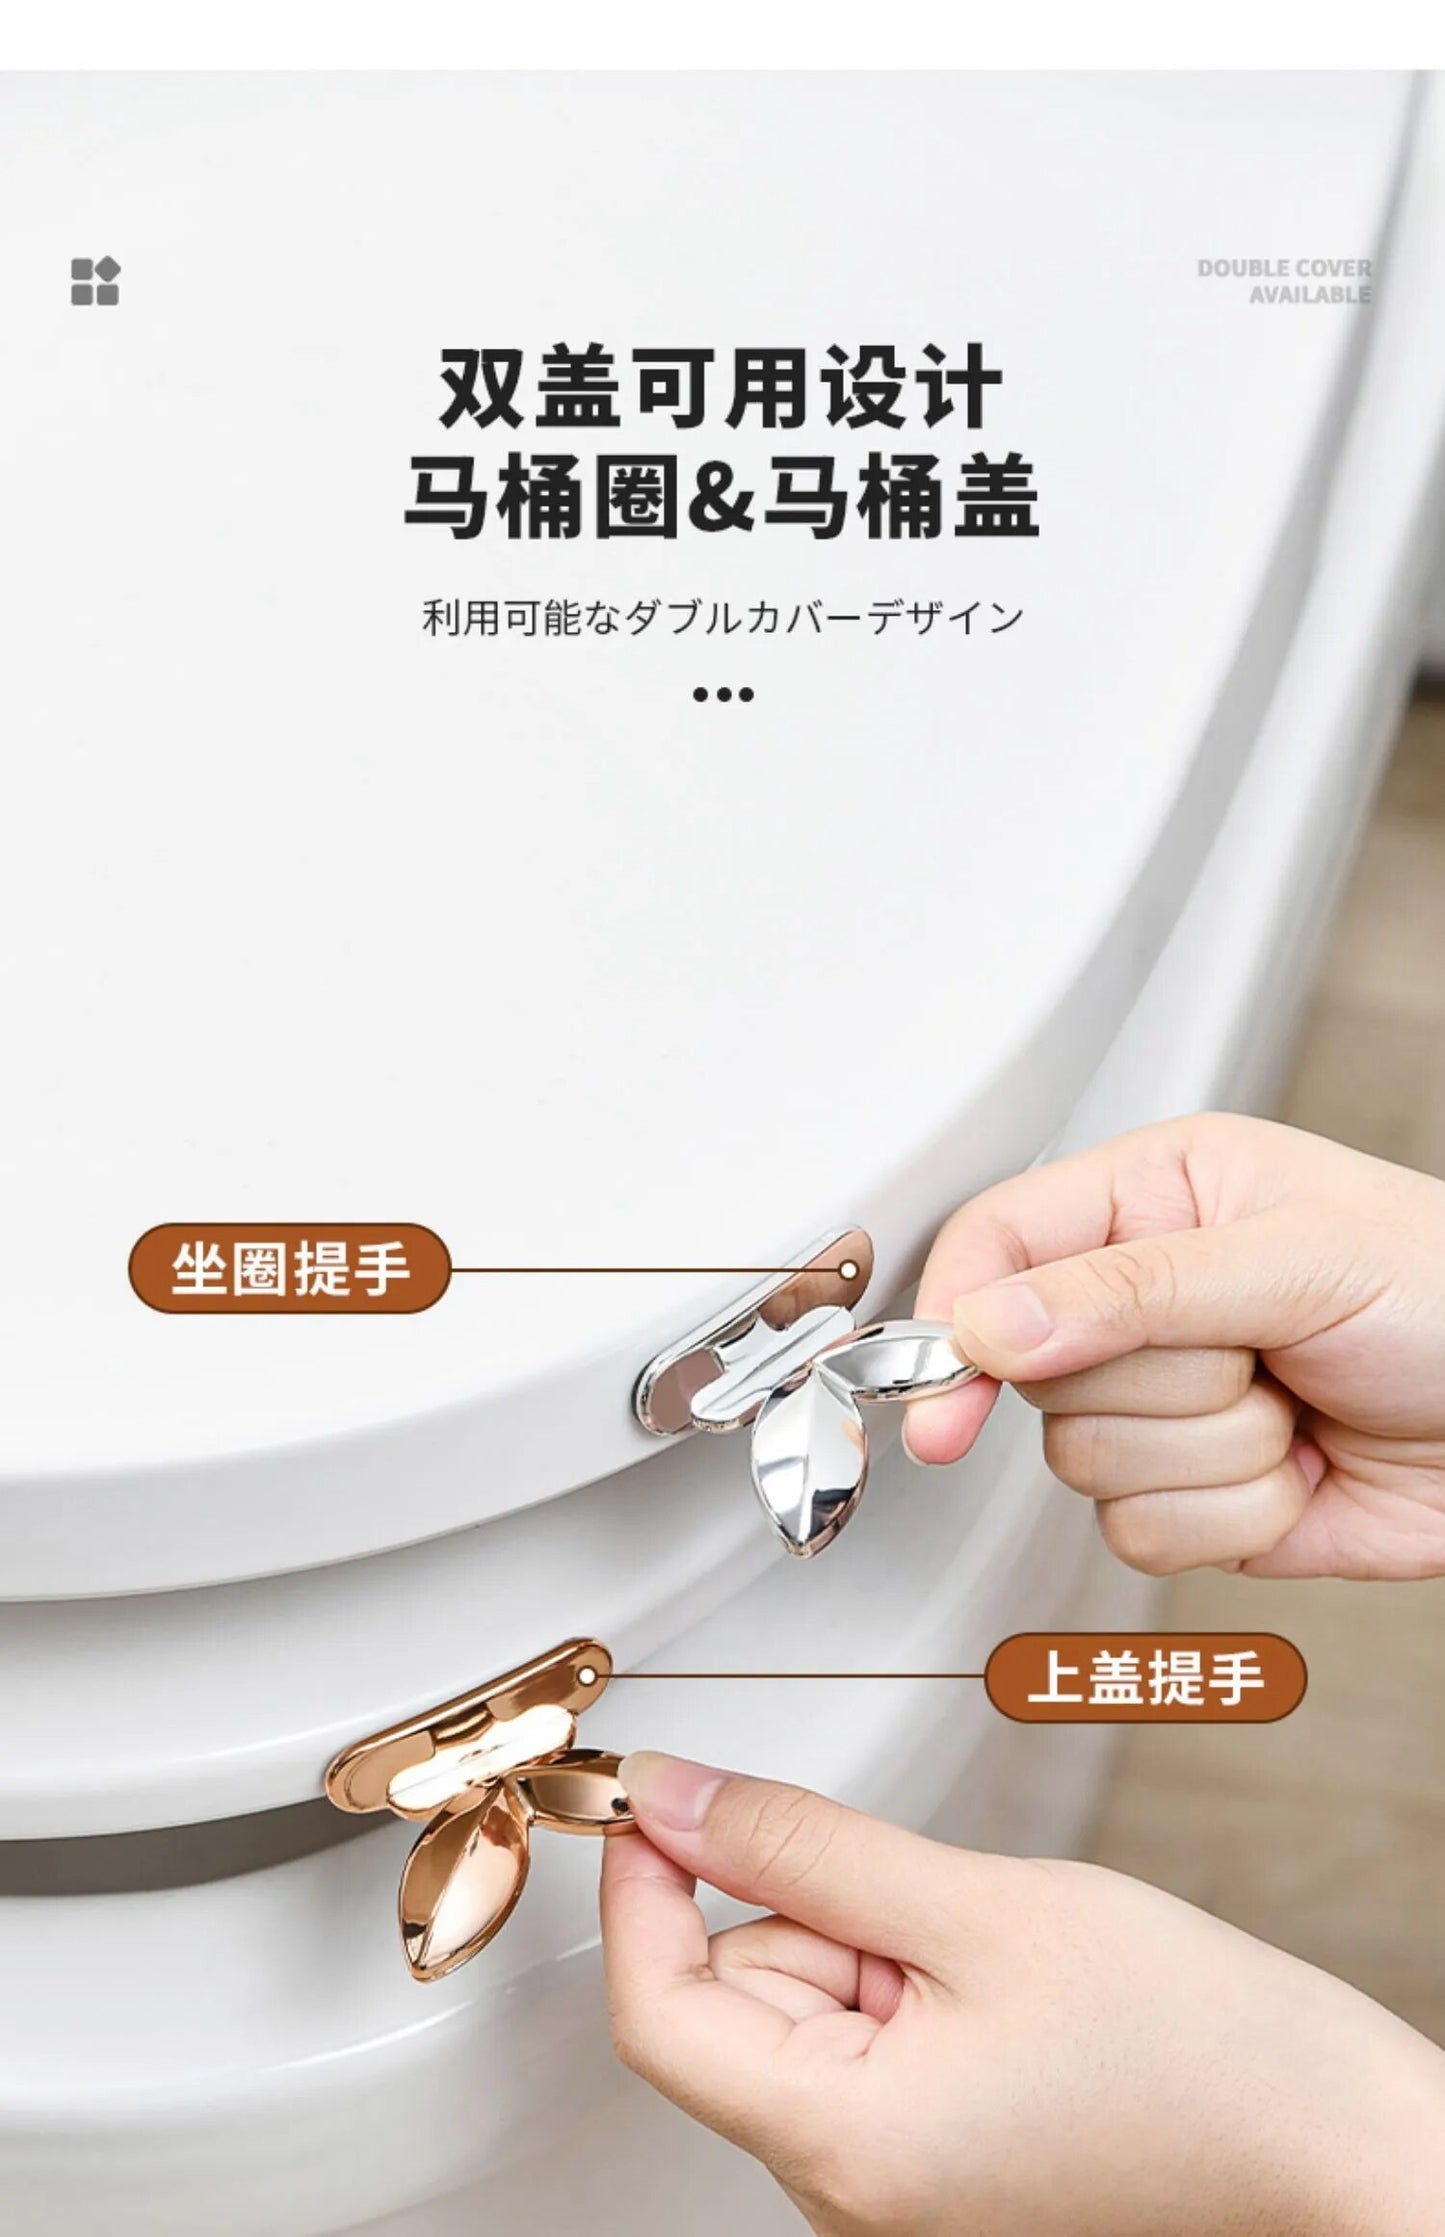 Hygienic Hands-Free Toilet Seat Lifter - Easy-Install Adhesive Bathroom Accessory